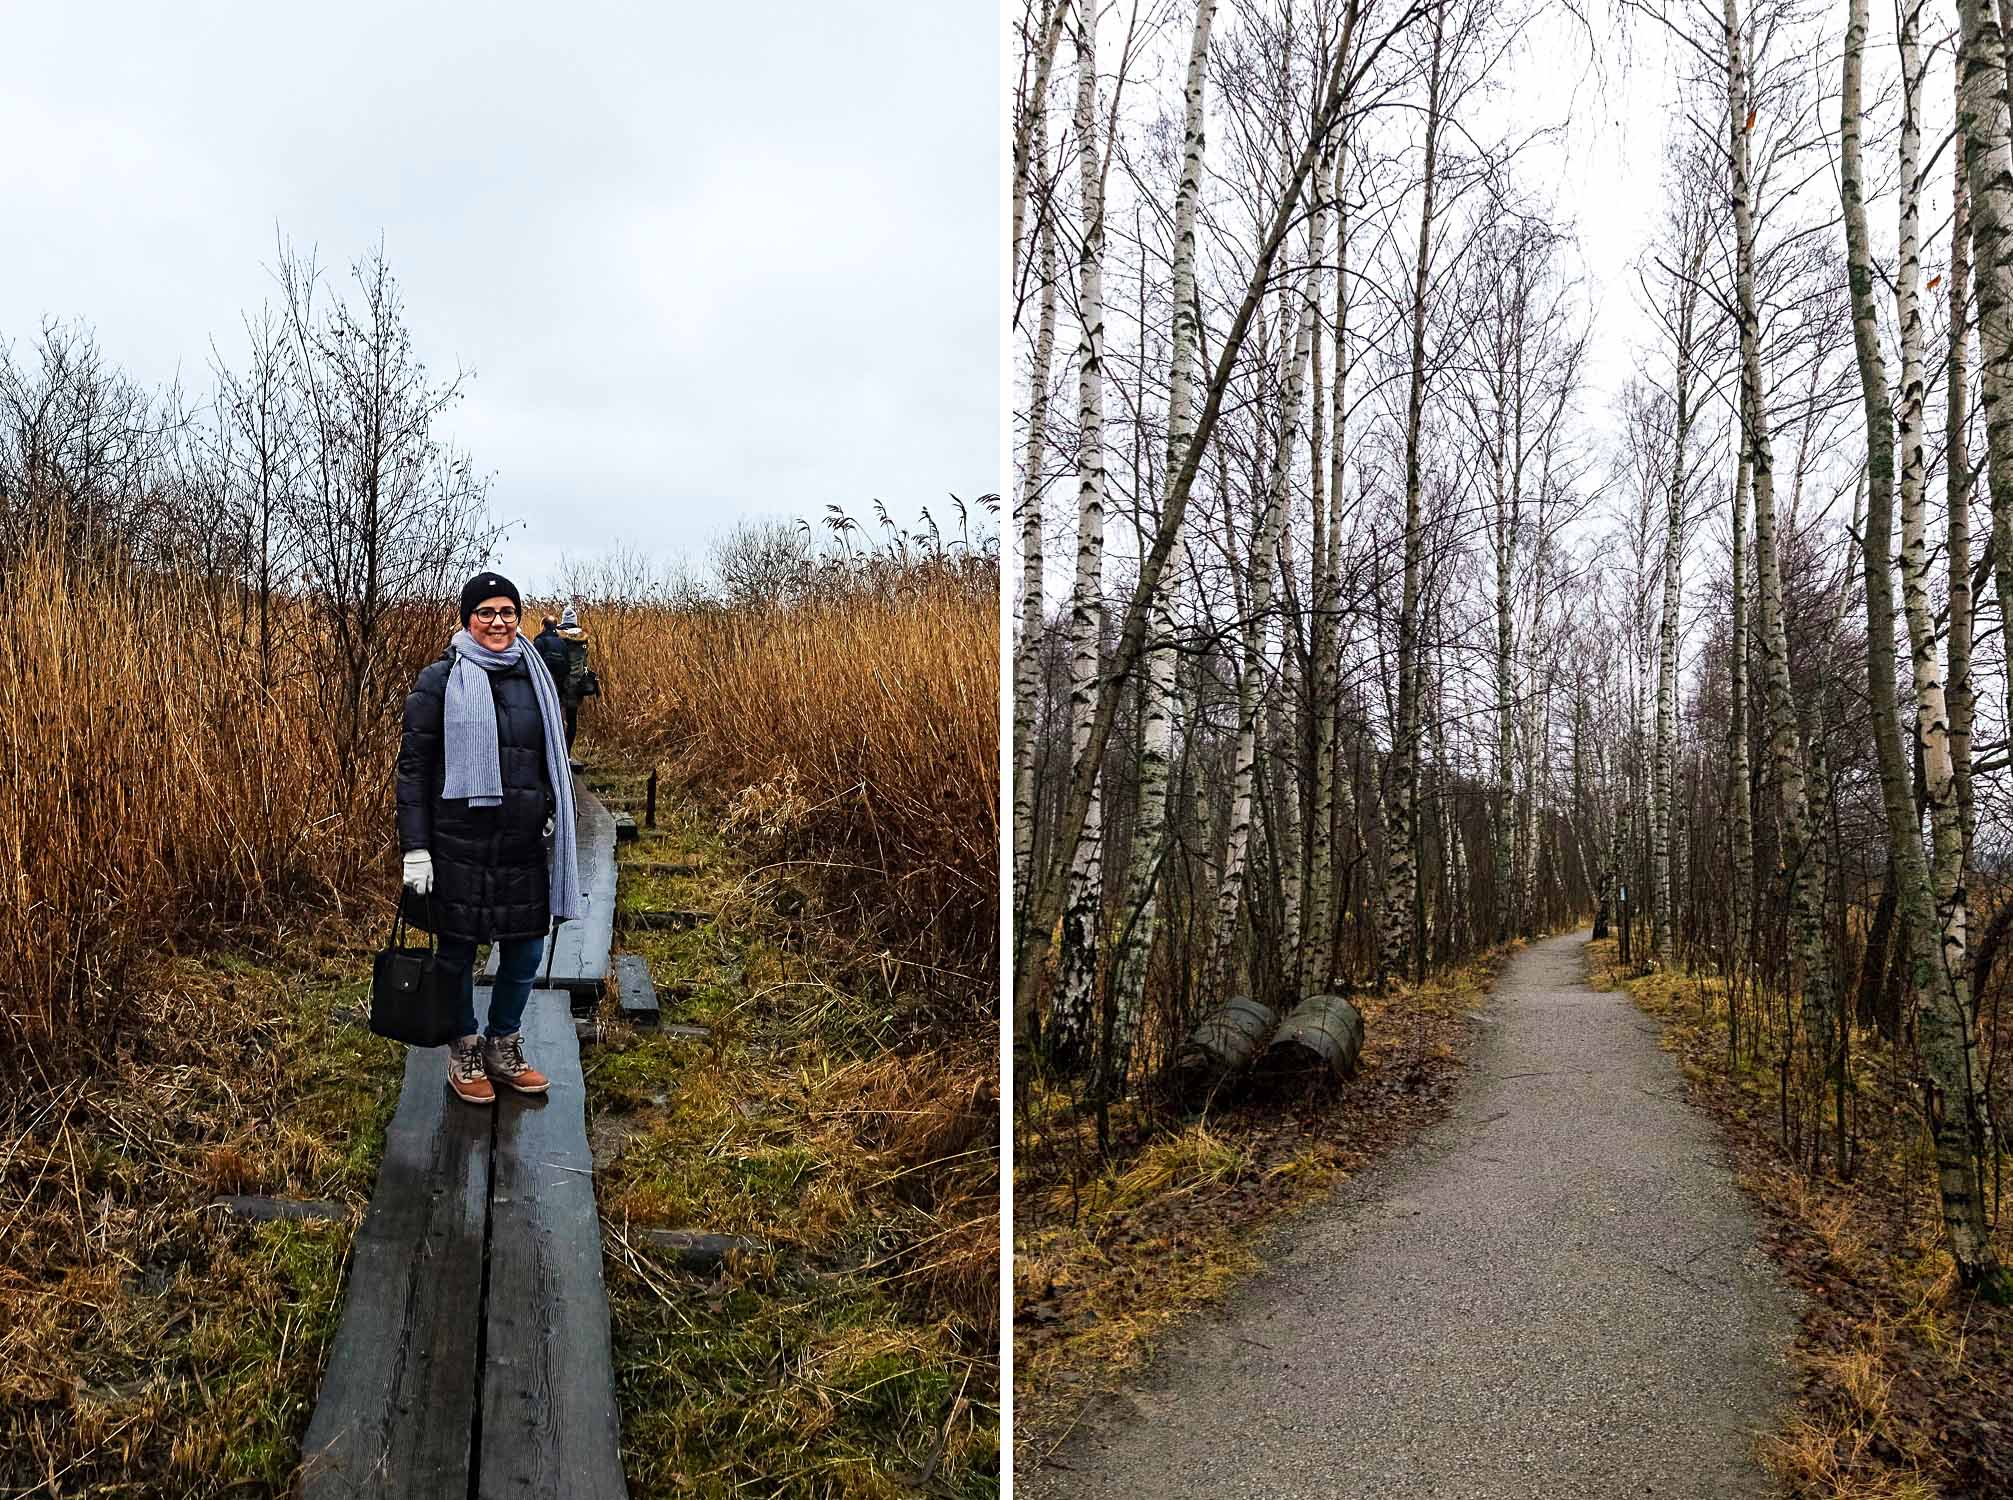 Vanhankaupunginlahti Nature Reserve - Helsinki: A Two-Day City Guide to The Finnish Capital